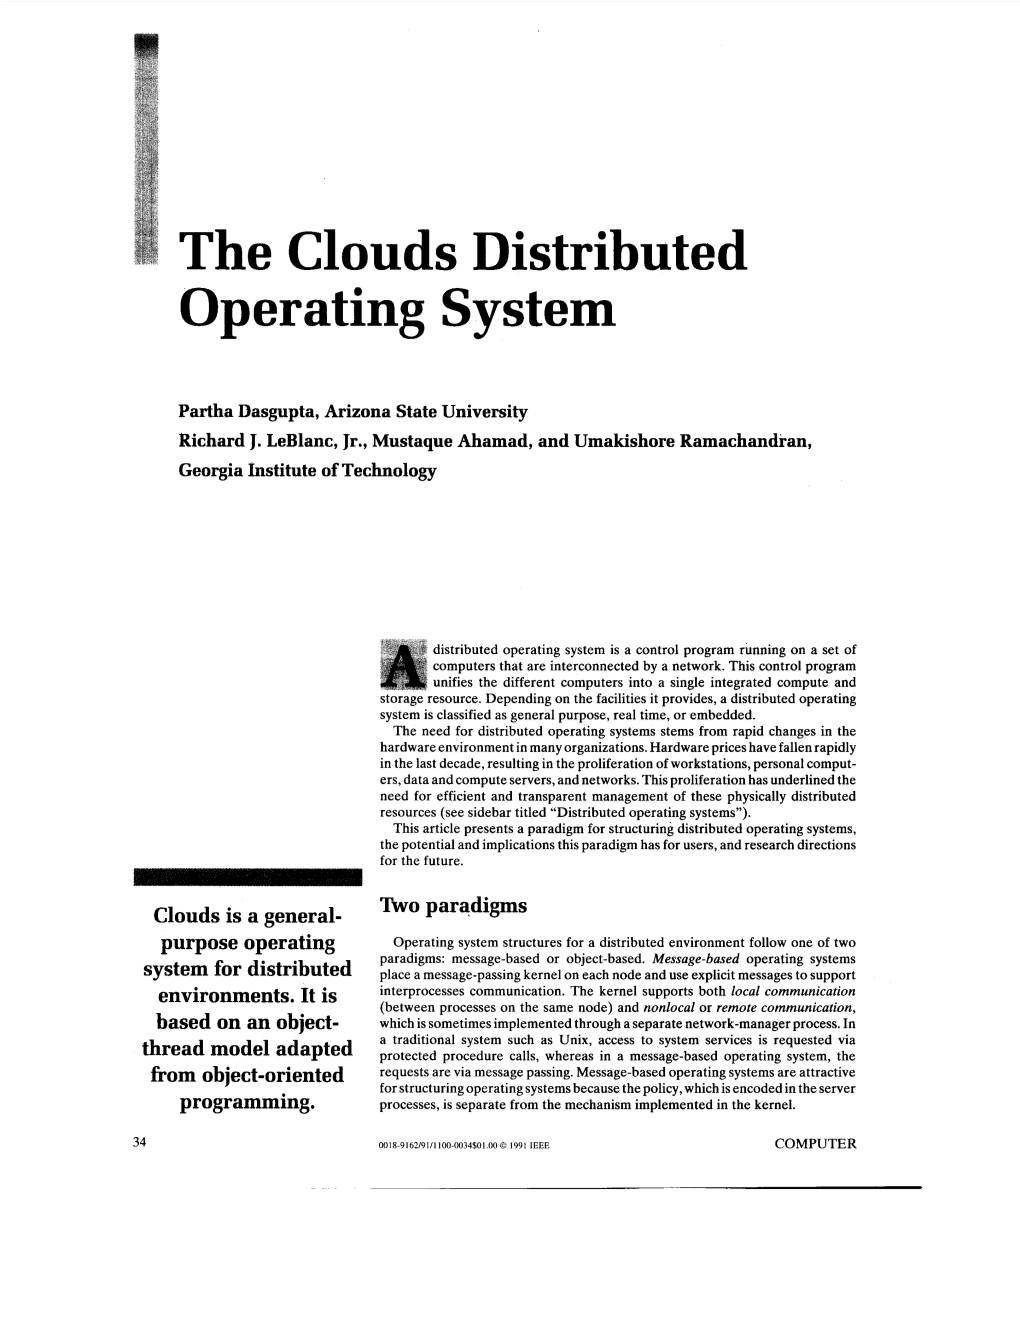 The Clouds Distributed Operating System